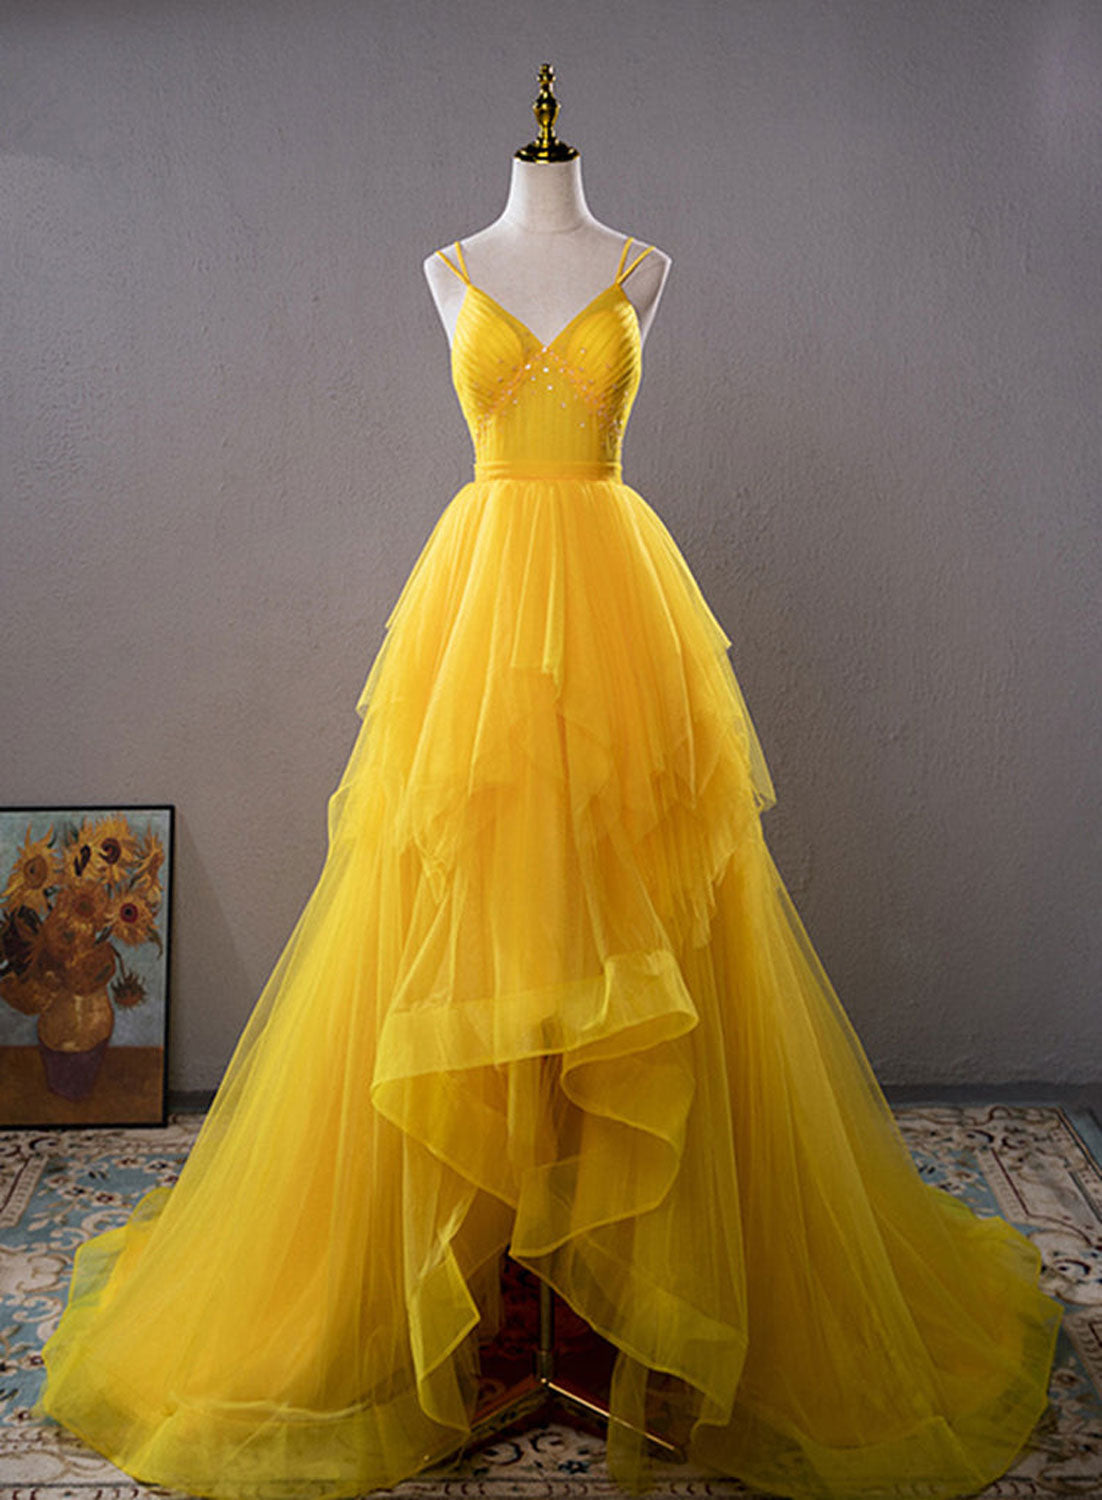 yellow Princess type prewedding gown at Rs 7500 | Bridal Gown in Surat |  ID: 26495071897